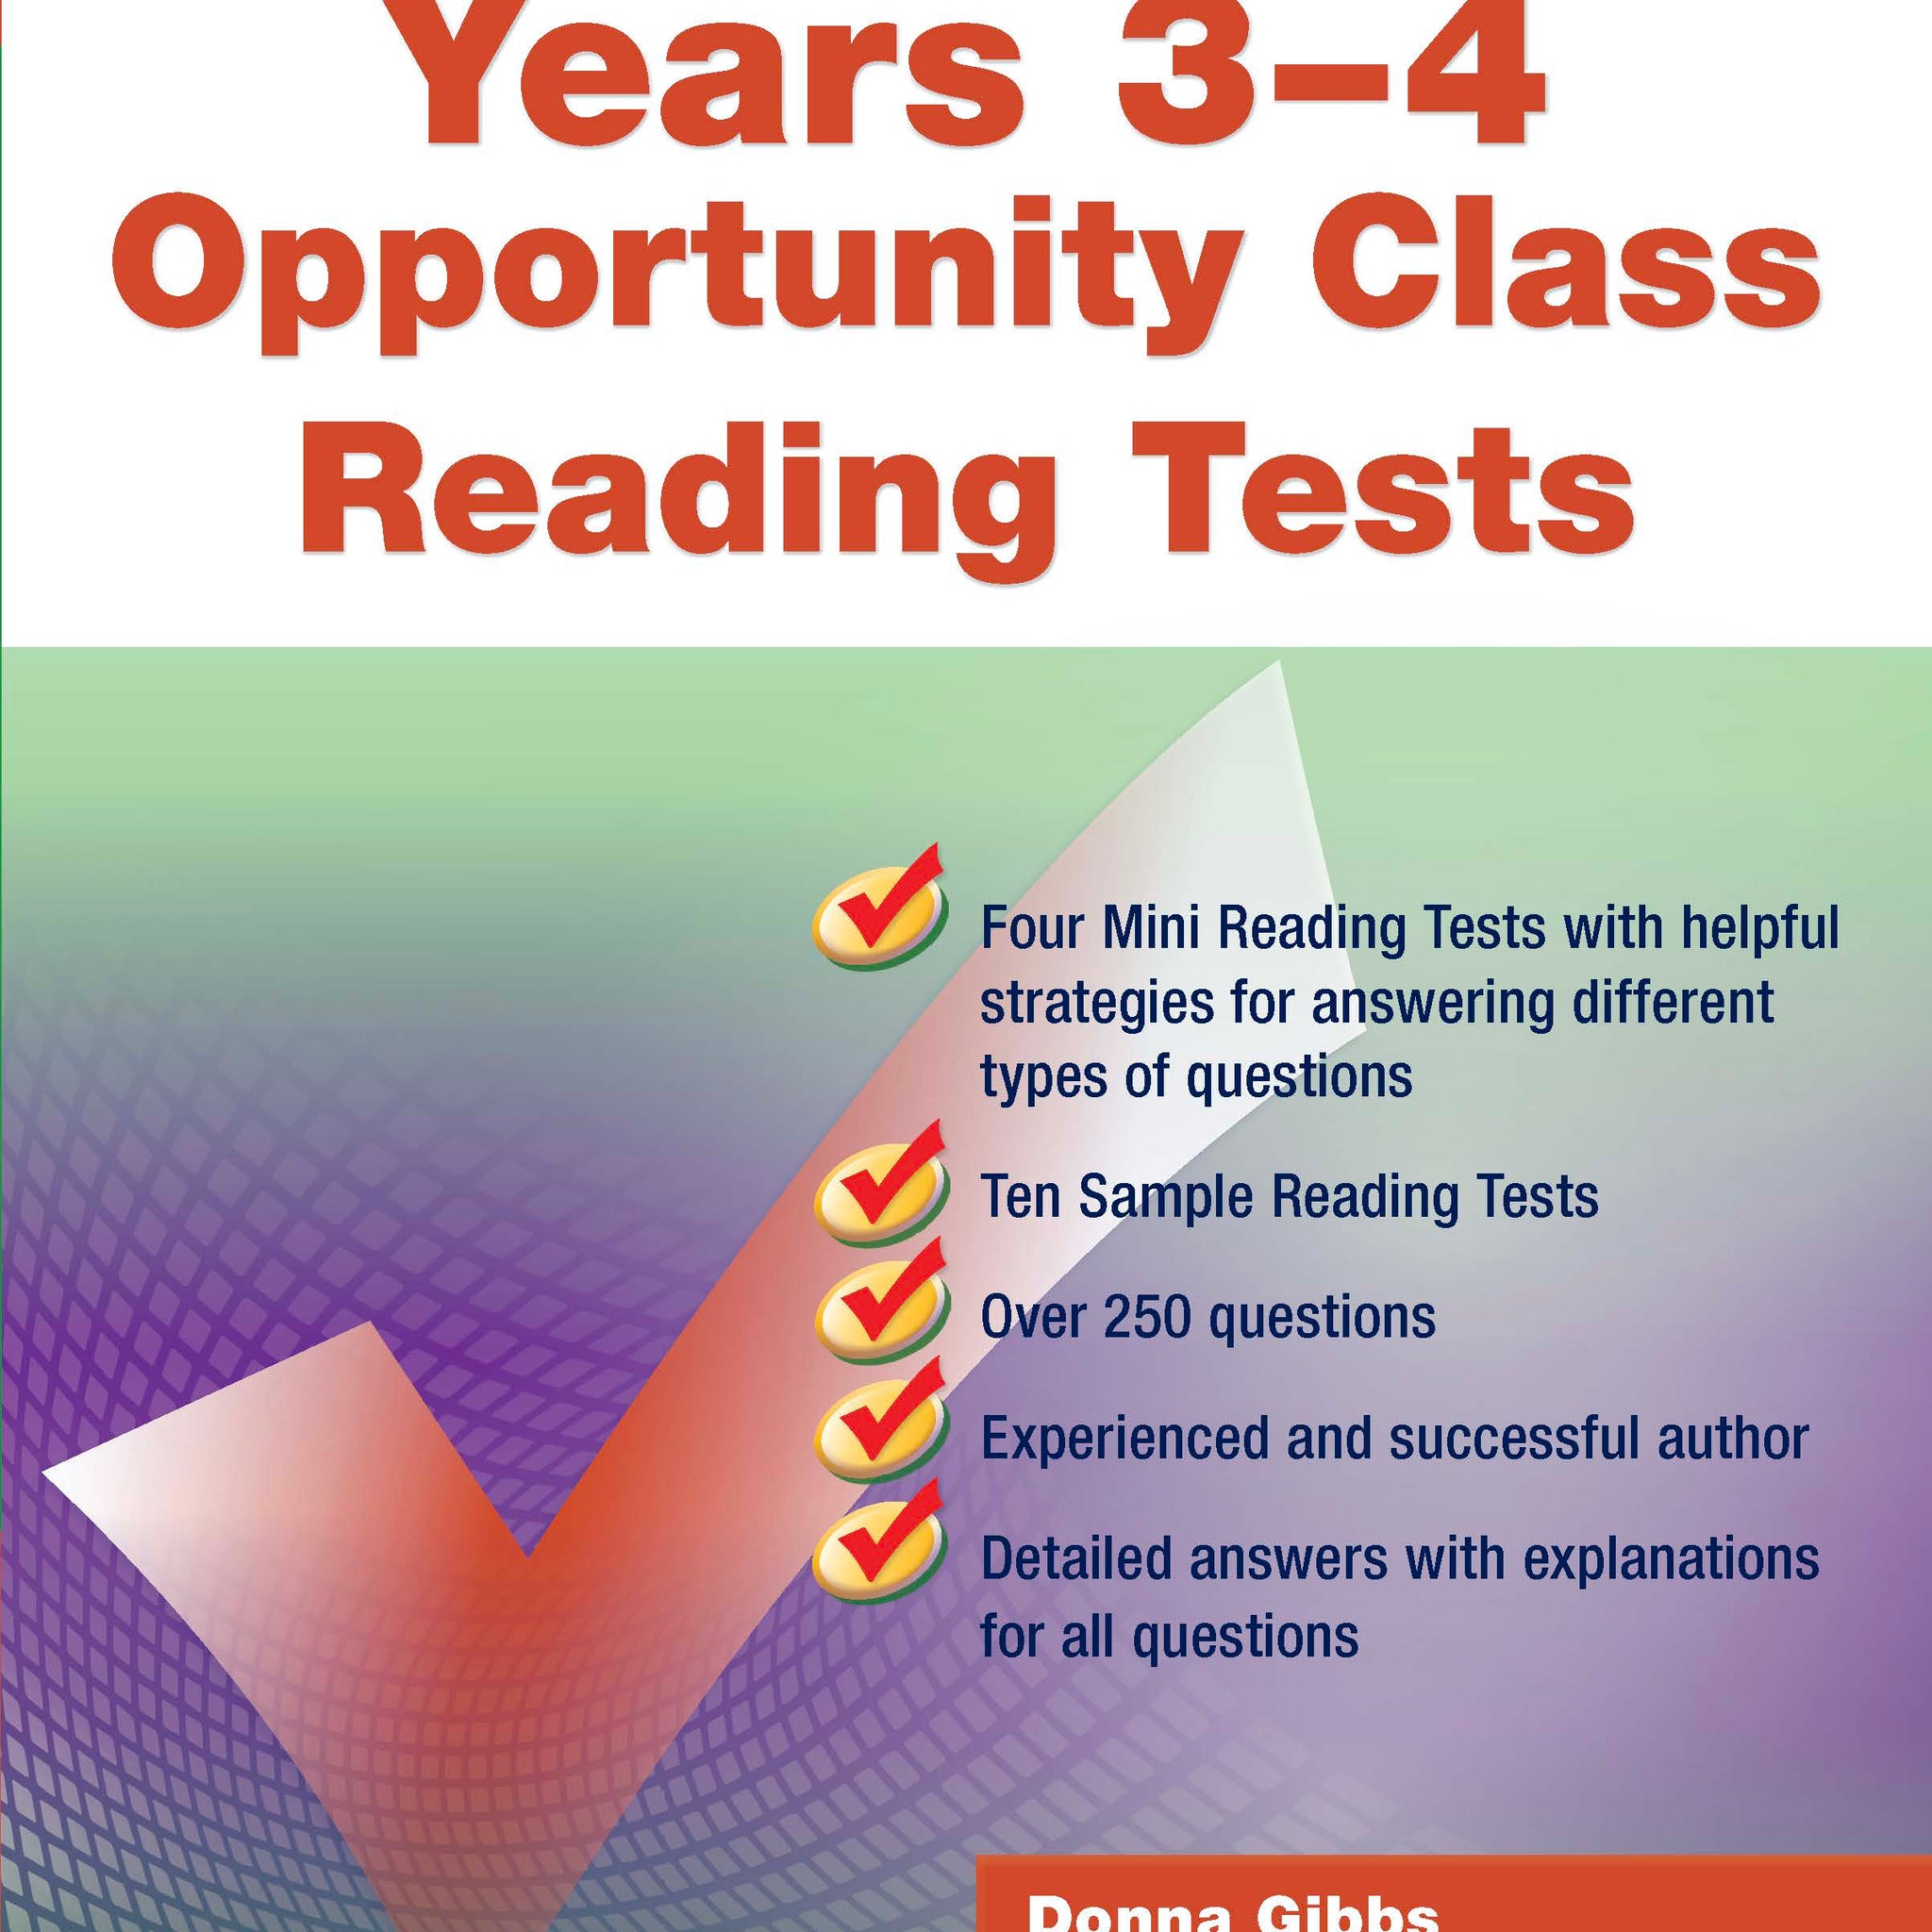 Excel Opportunity Class Reading Tests Years 3&4